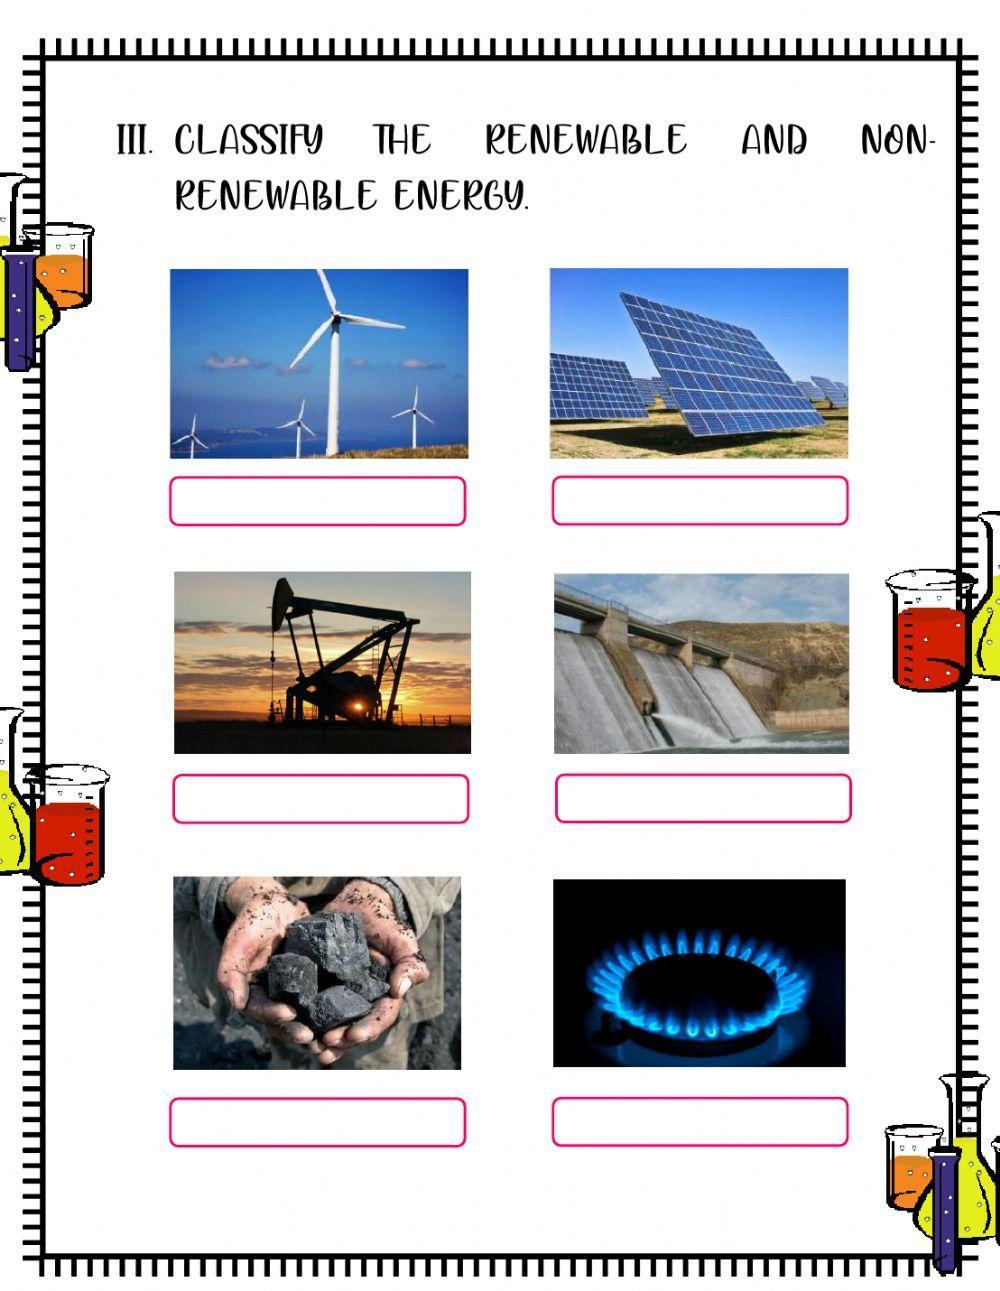 Energy and its sources